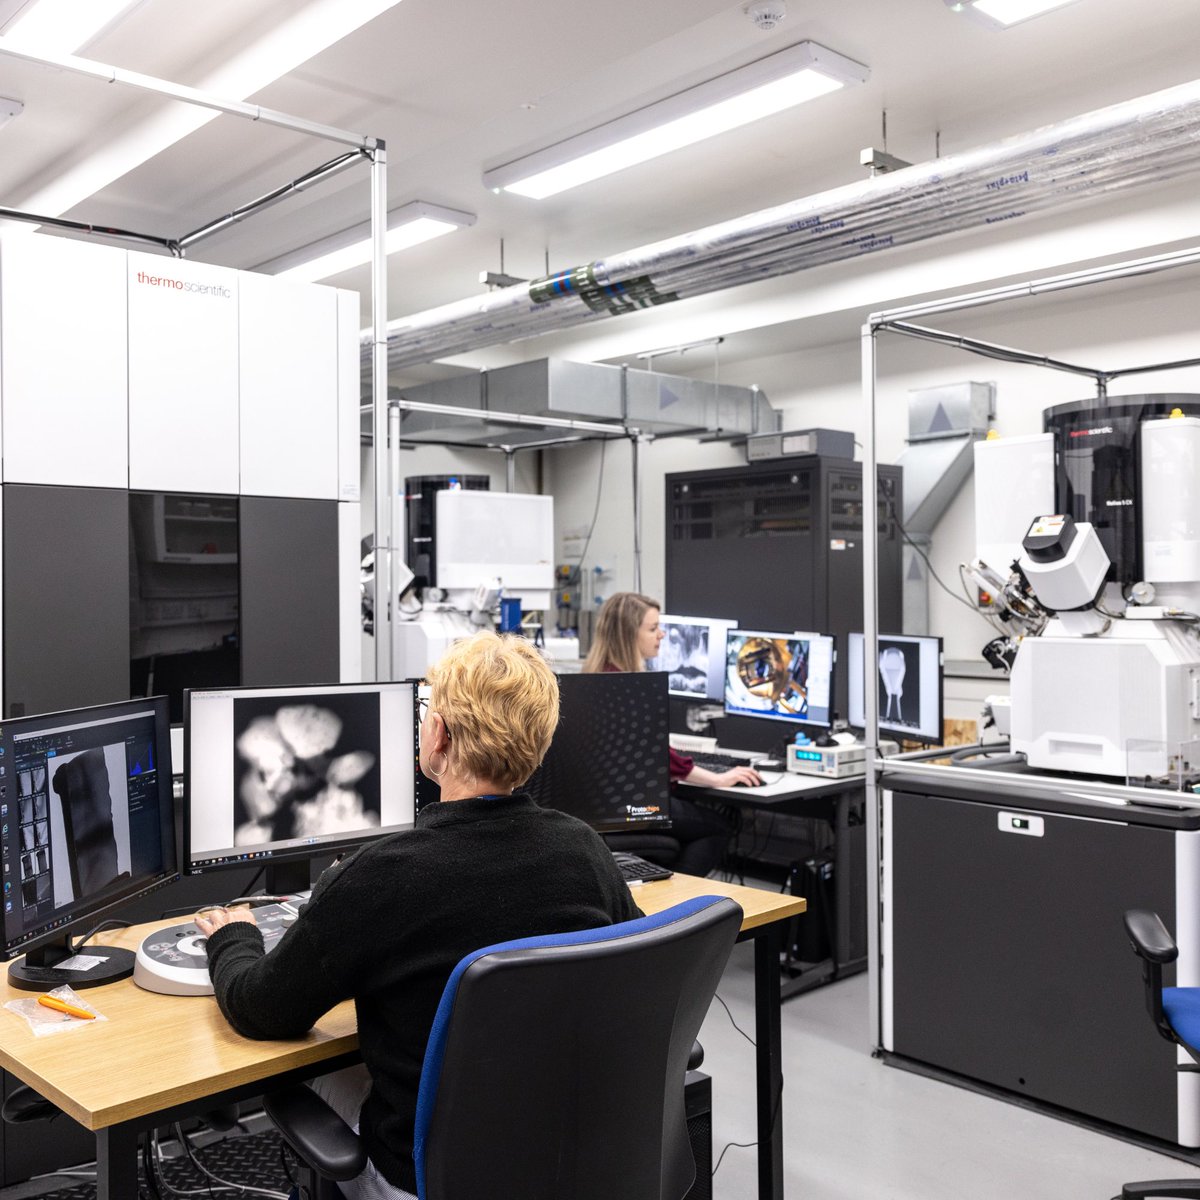 We’re hiring a postdoctoral researcher in 4D-STEM in our microscopy group and @SandrineHeutz molecular thin films group within the @EPSRC CAMIE grant @RoyalMicroSoc @MicroscopySoc #ferroelectric #spintronics #microscopy 

Find out more and apply: ow.ly/hp5R50RAsTZ+